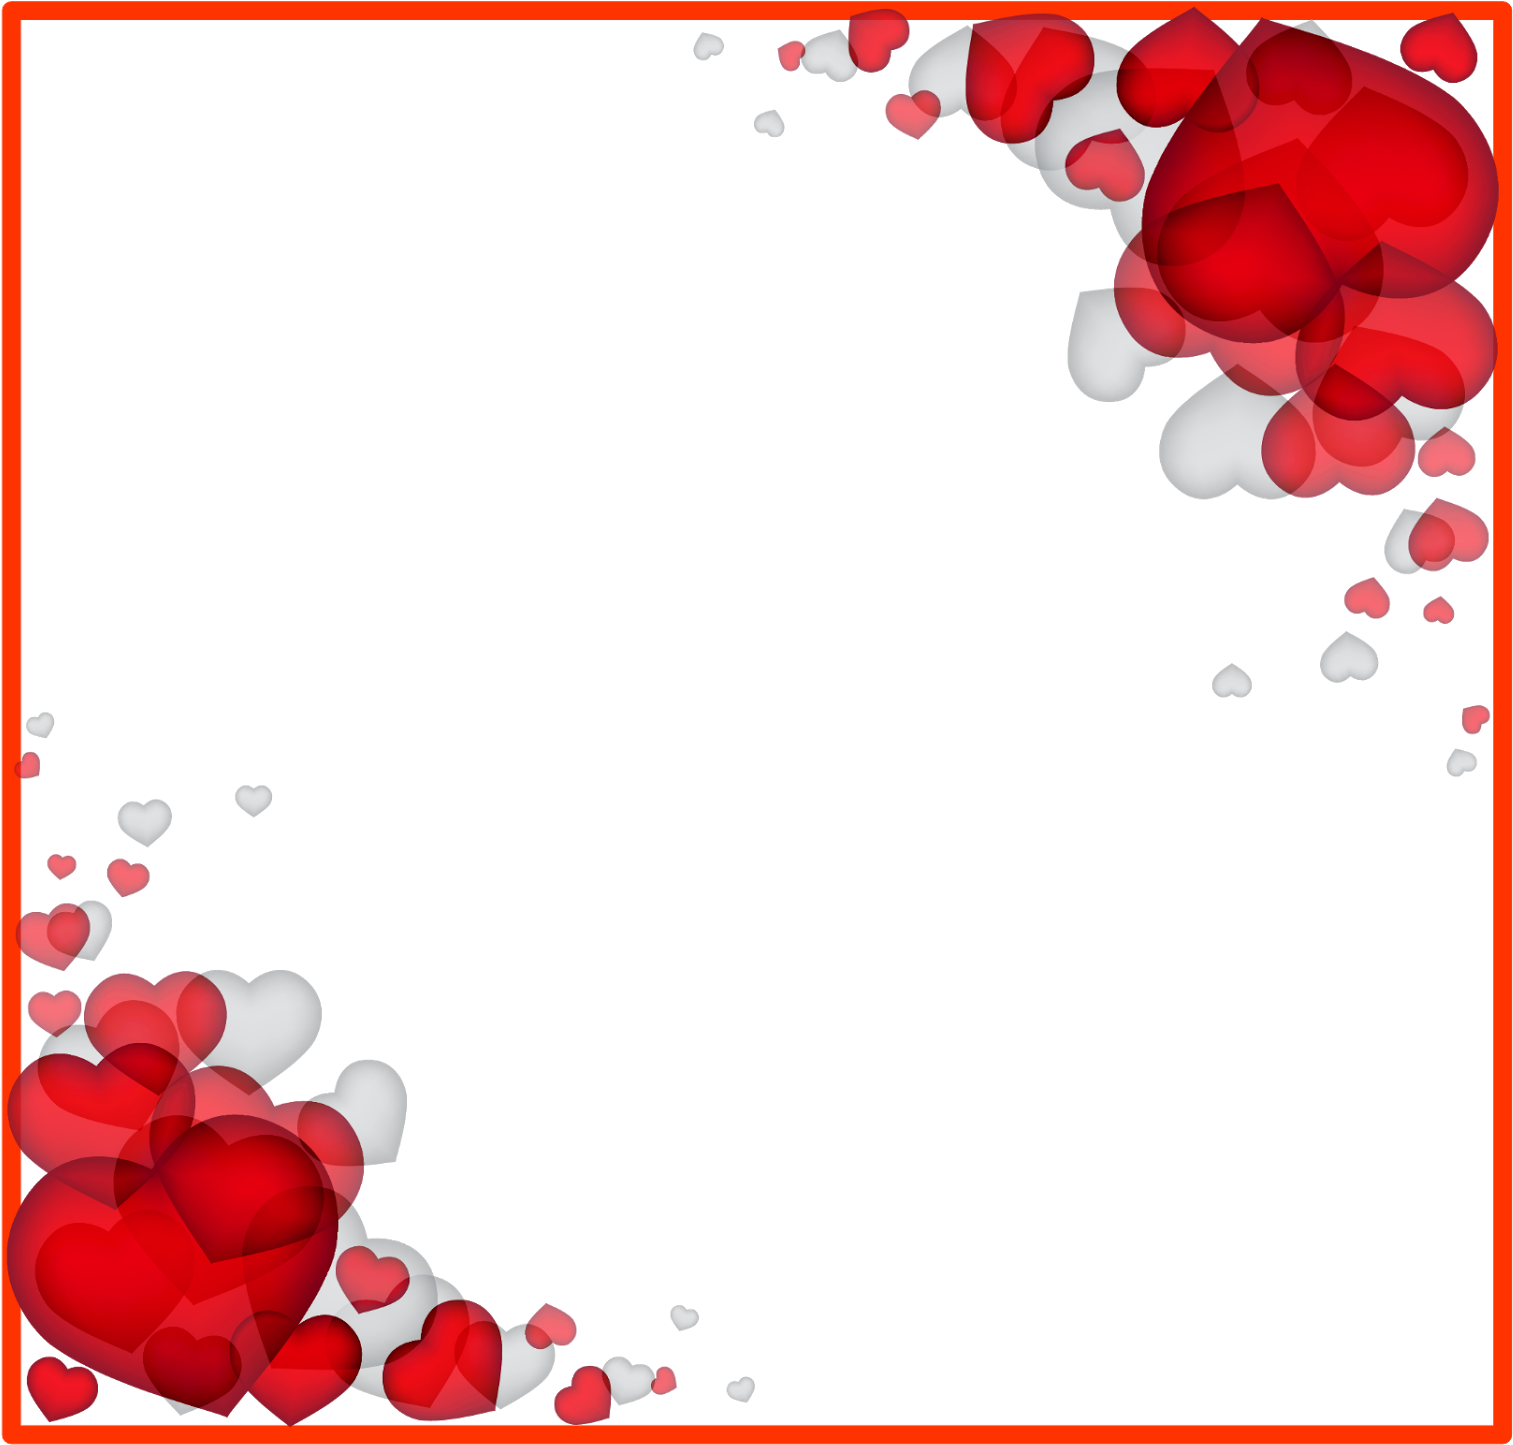 Love Valentines Day Border PNG HD Quality